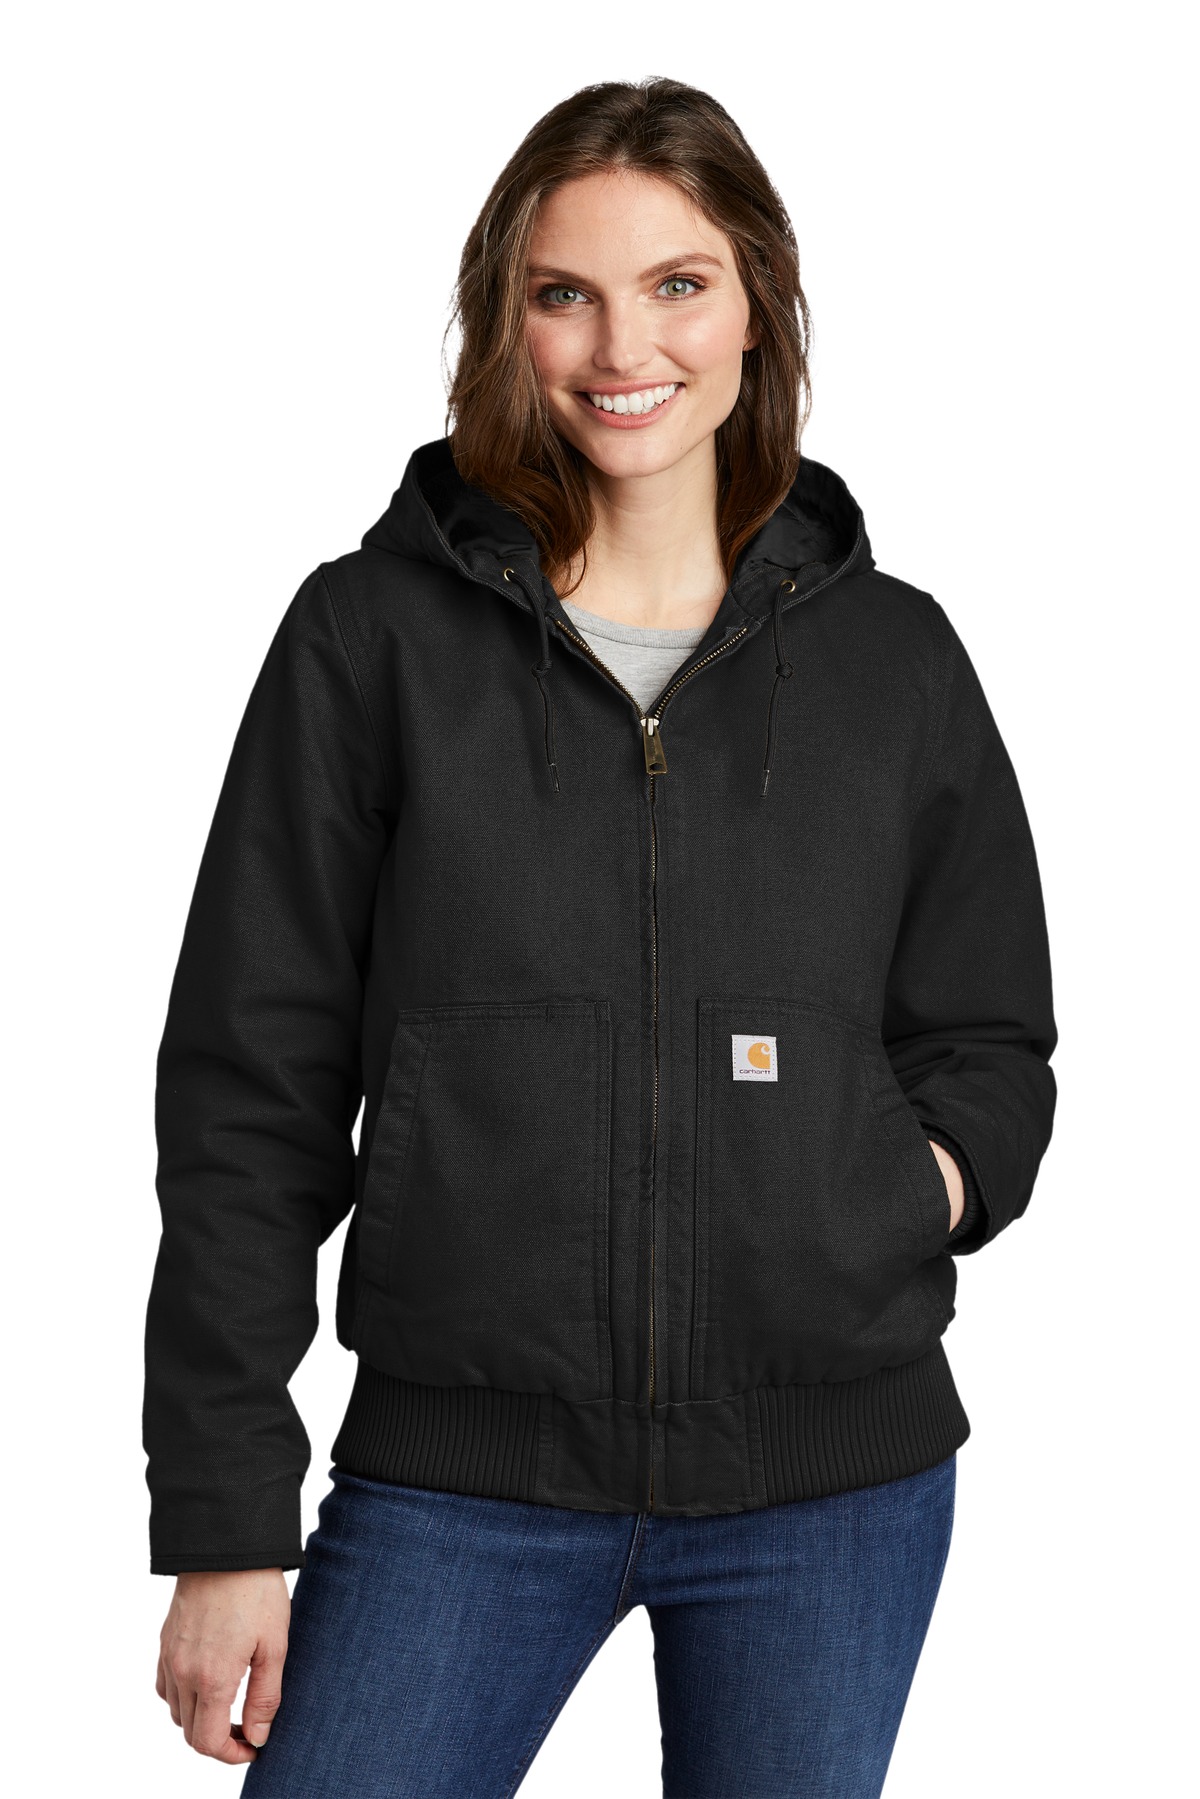 Carhartt Womens Washed Duck Active Jac. CT104053